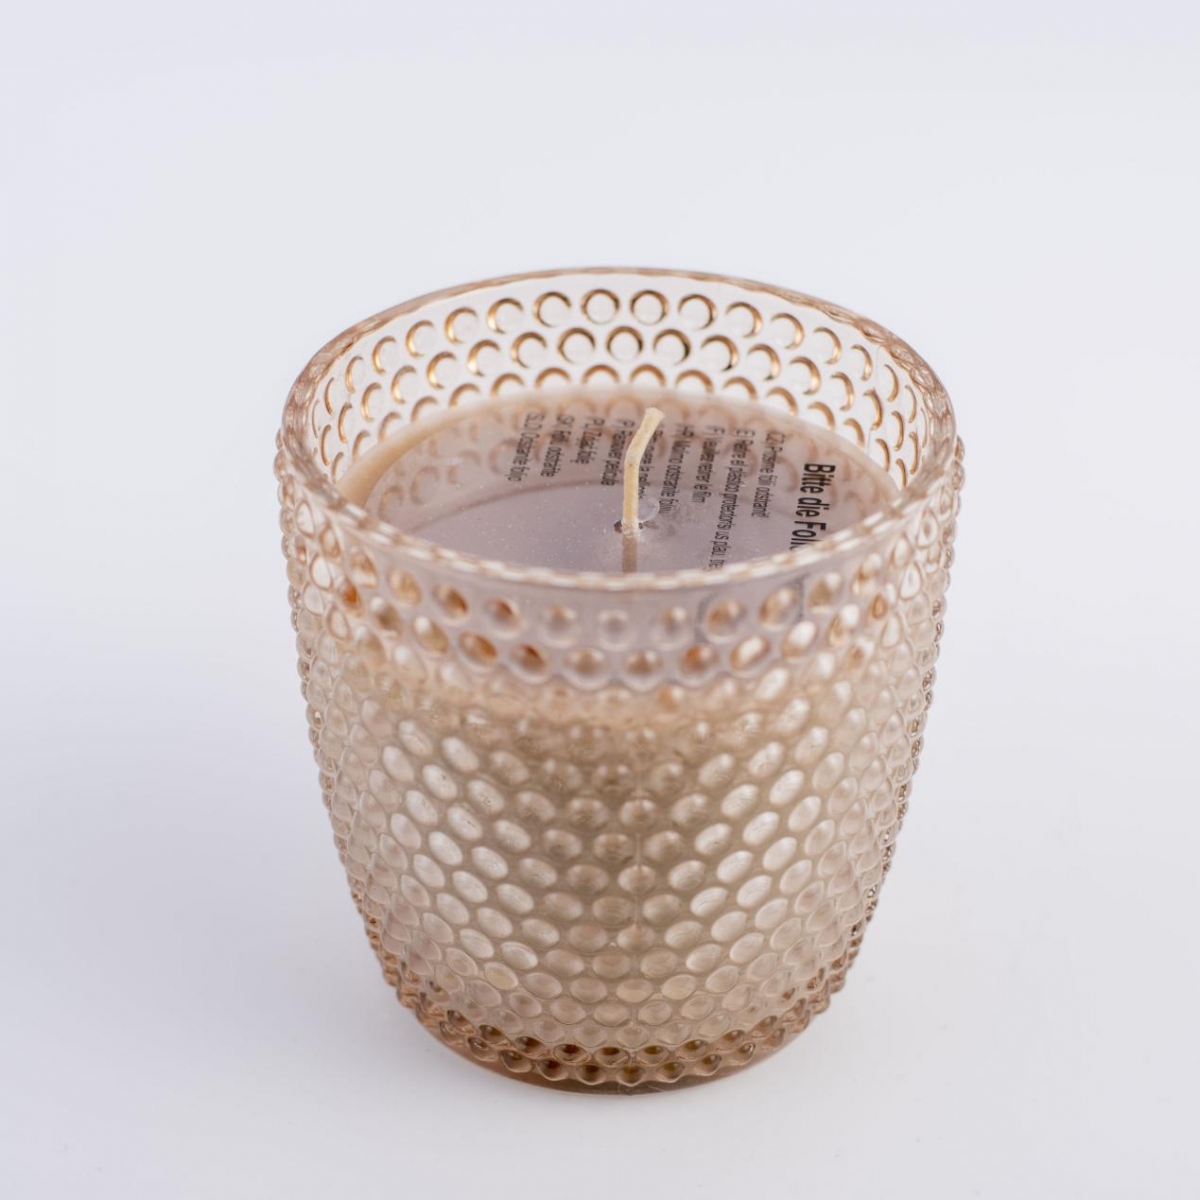 Scented Candles – Champagne Fragrance ,Soy Candle ,Raised Dots Glass ,China Factory ,Cheapest Price-HOWCANDLE-Candles,Scented Candles,Aromatherapy Candles,Soy Candles,Vegan Candles,Jar Candles,Pillar Candles,Candle Gift Sets,Essential Oils,Reed Diffuser,Candle Holder,